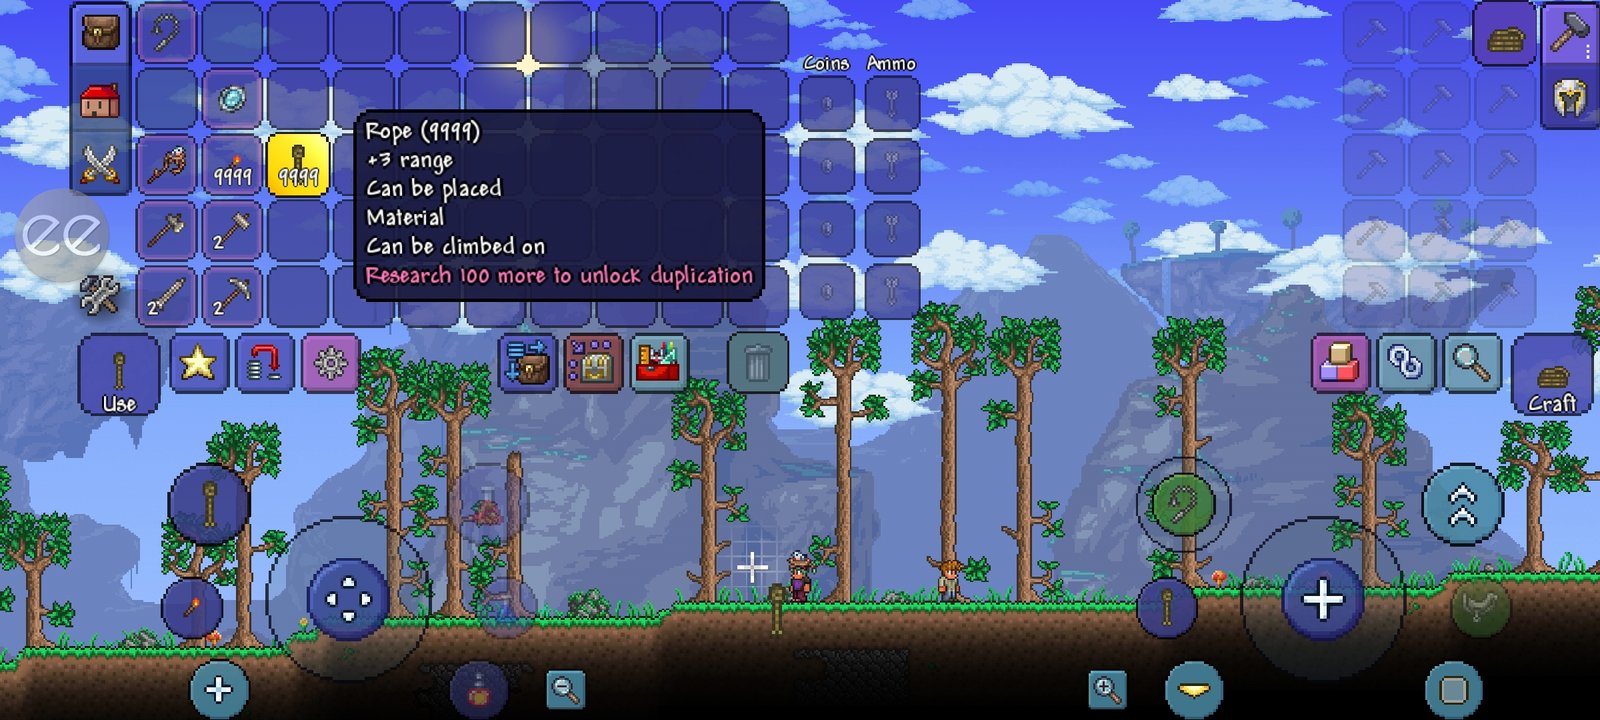 Terraria Apk v1.4.4.9.2 + MOD + OBB For Android Full Free Download